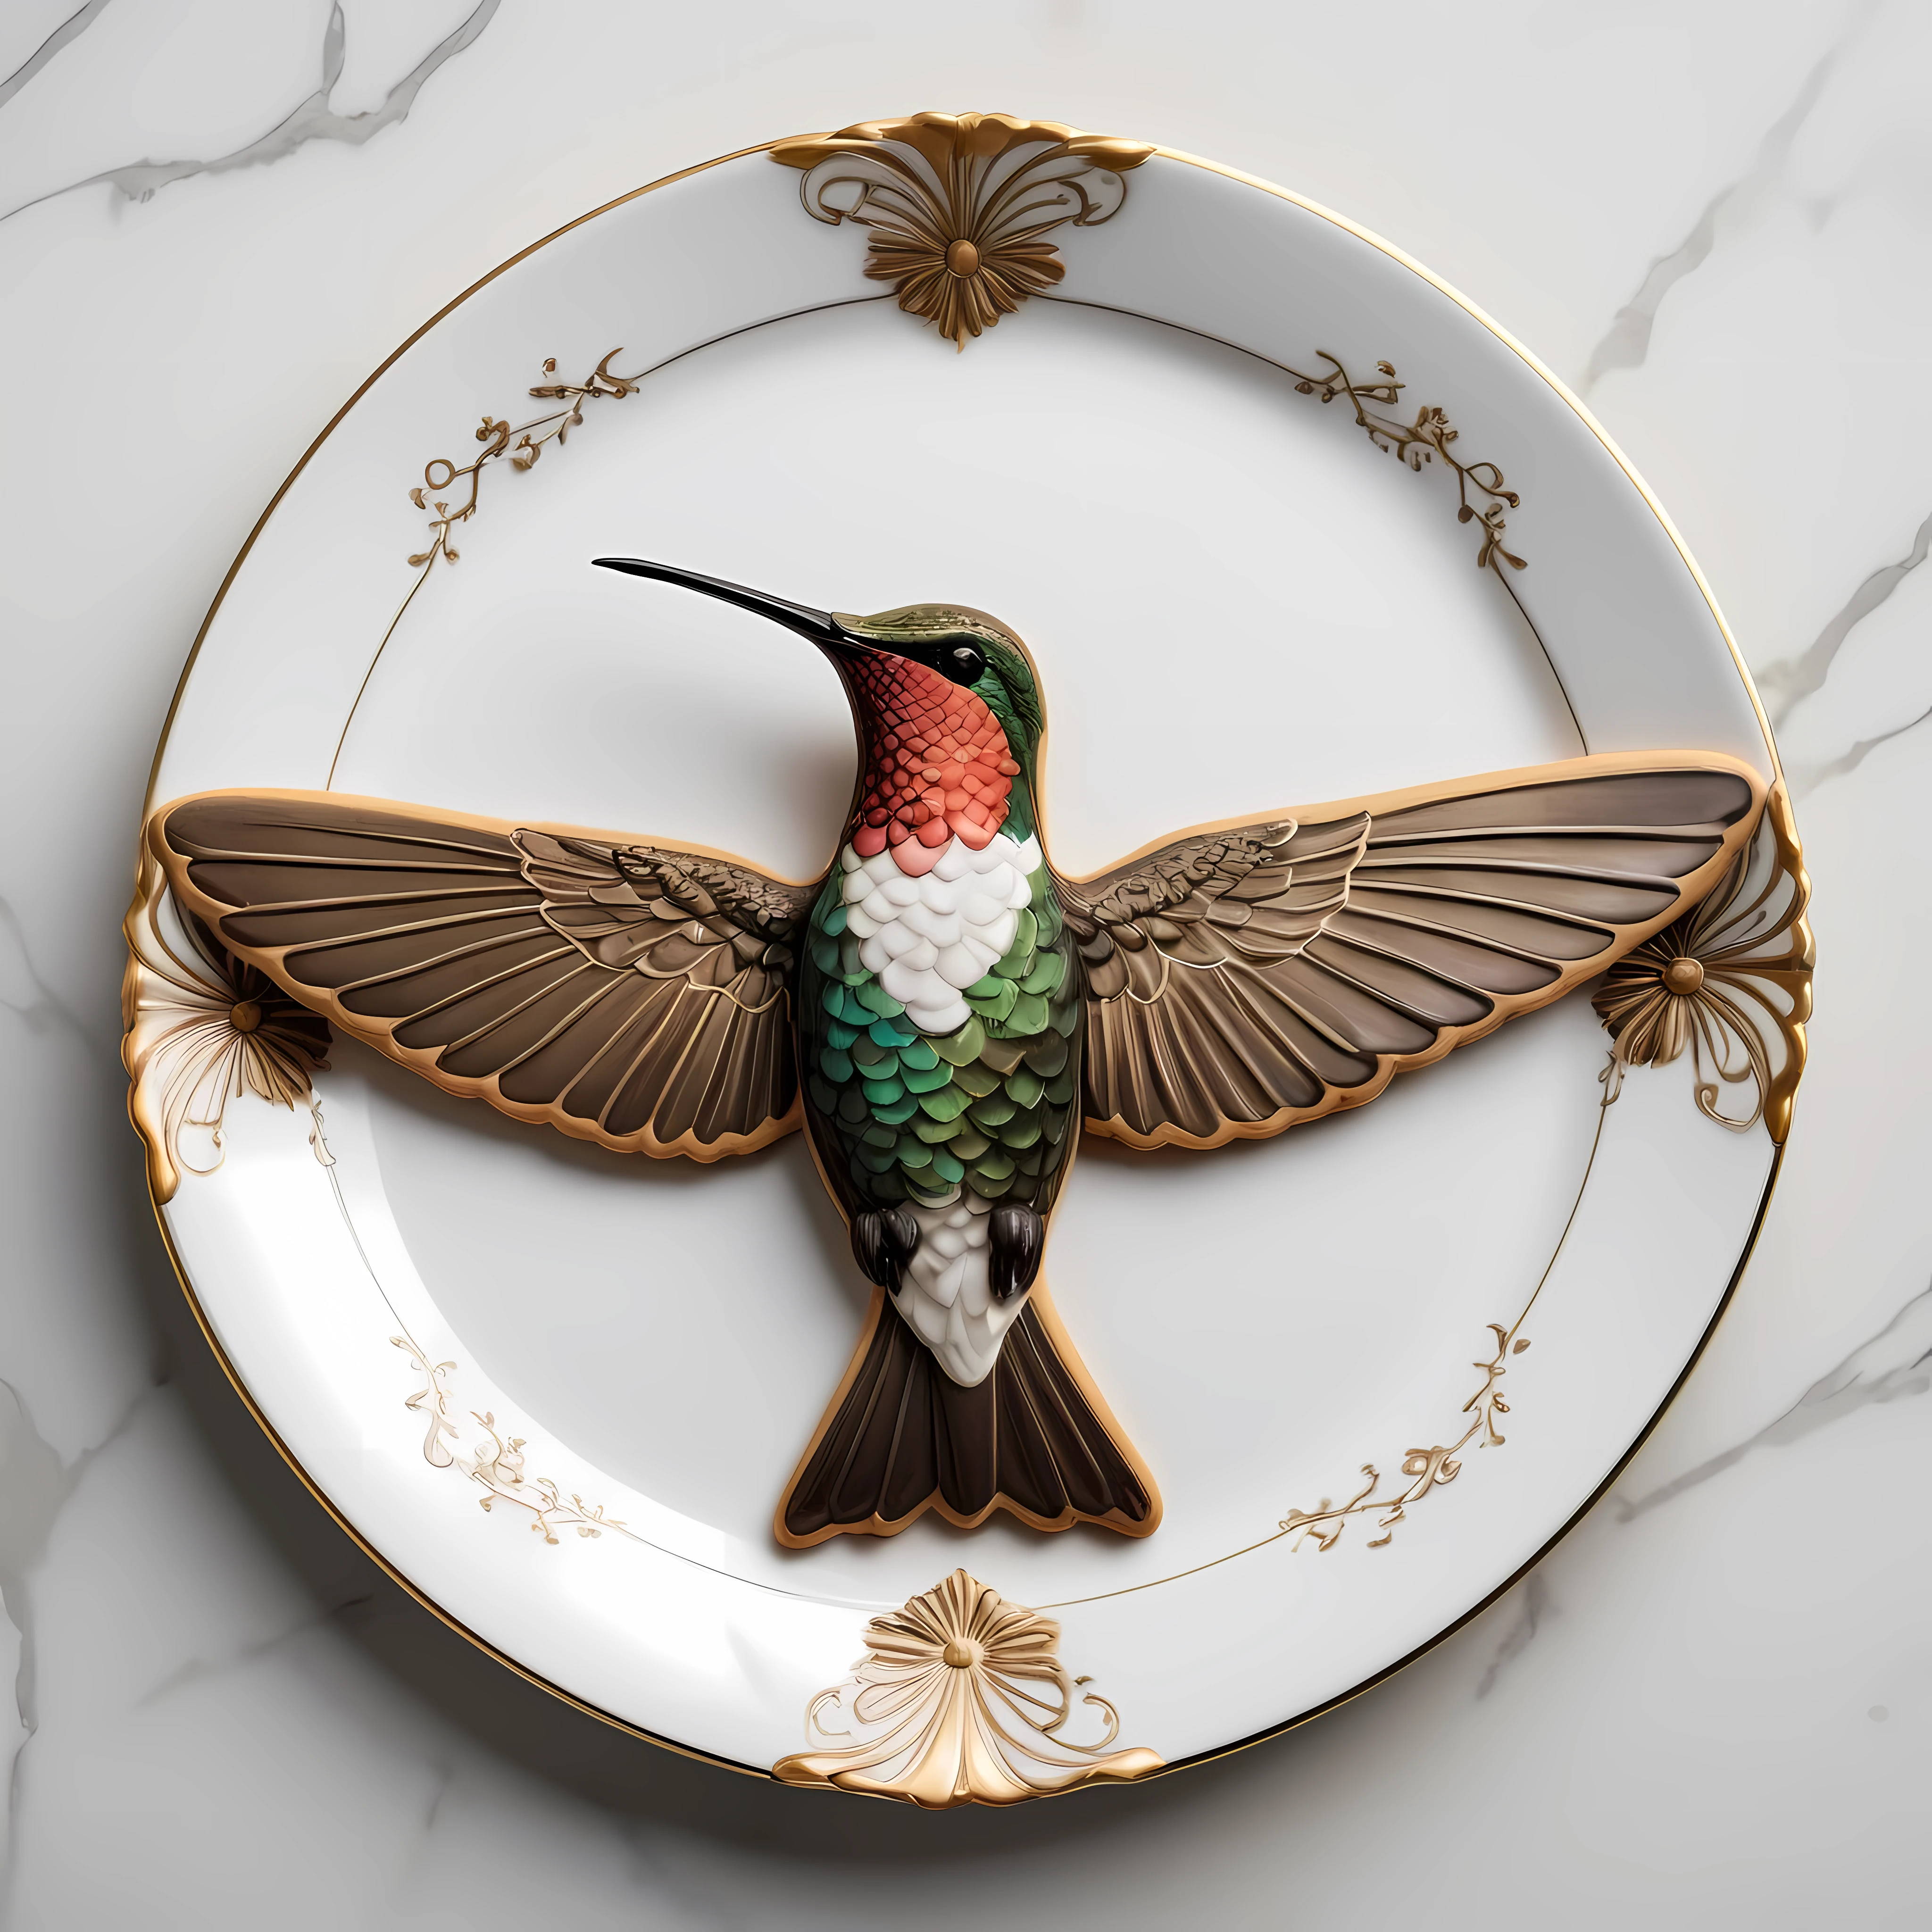 Masterpiece in maximum 16K resolution, superb quality, close up of an elegant decorative plate with a giant (hummingbird-shaped cookie), the plate is made of finest porcelain and has otherworldly eerie design, and positioned on an empty white table with gothic patterns, delicate, dimly lit. | ((More_Detail))